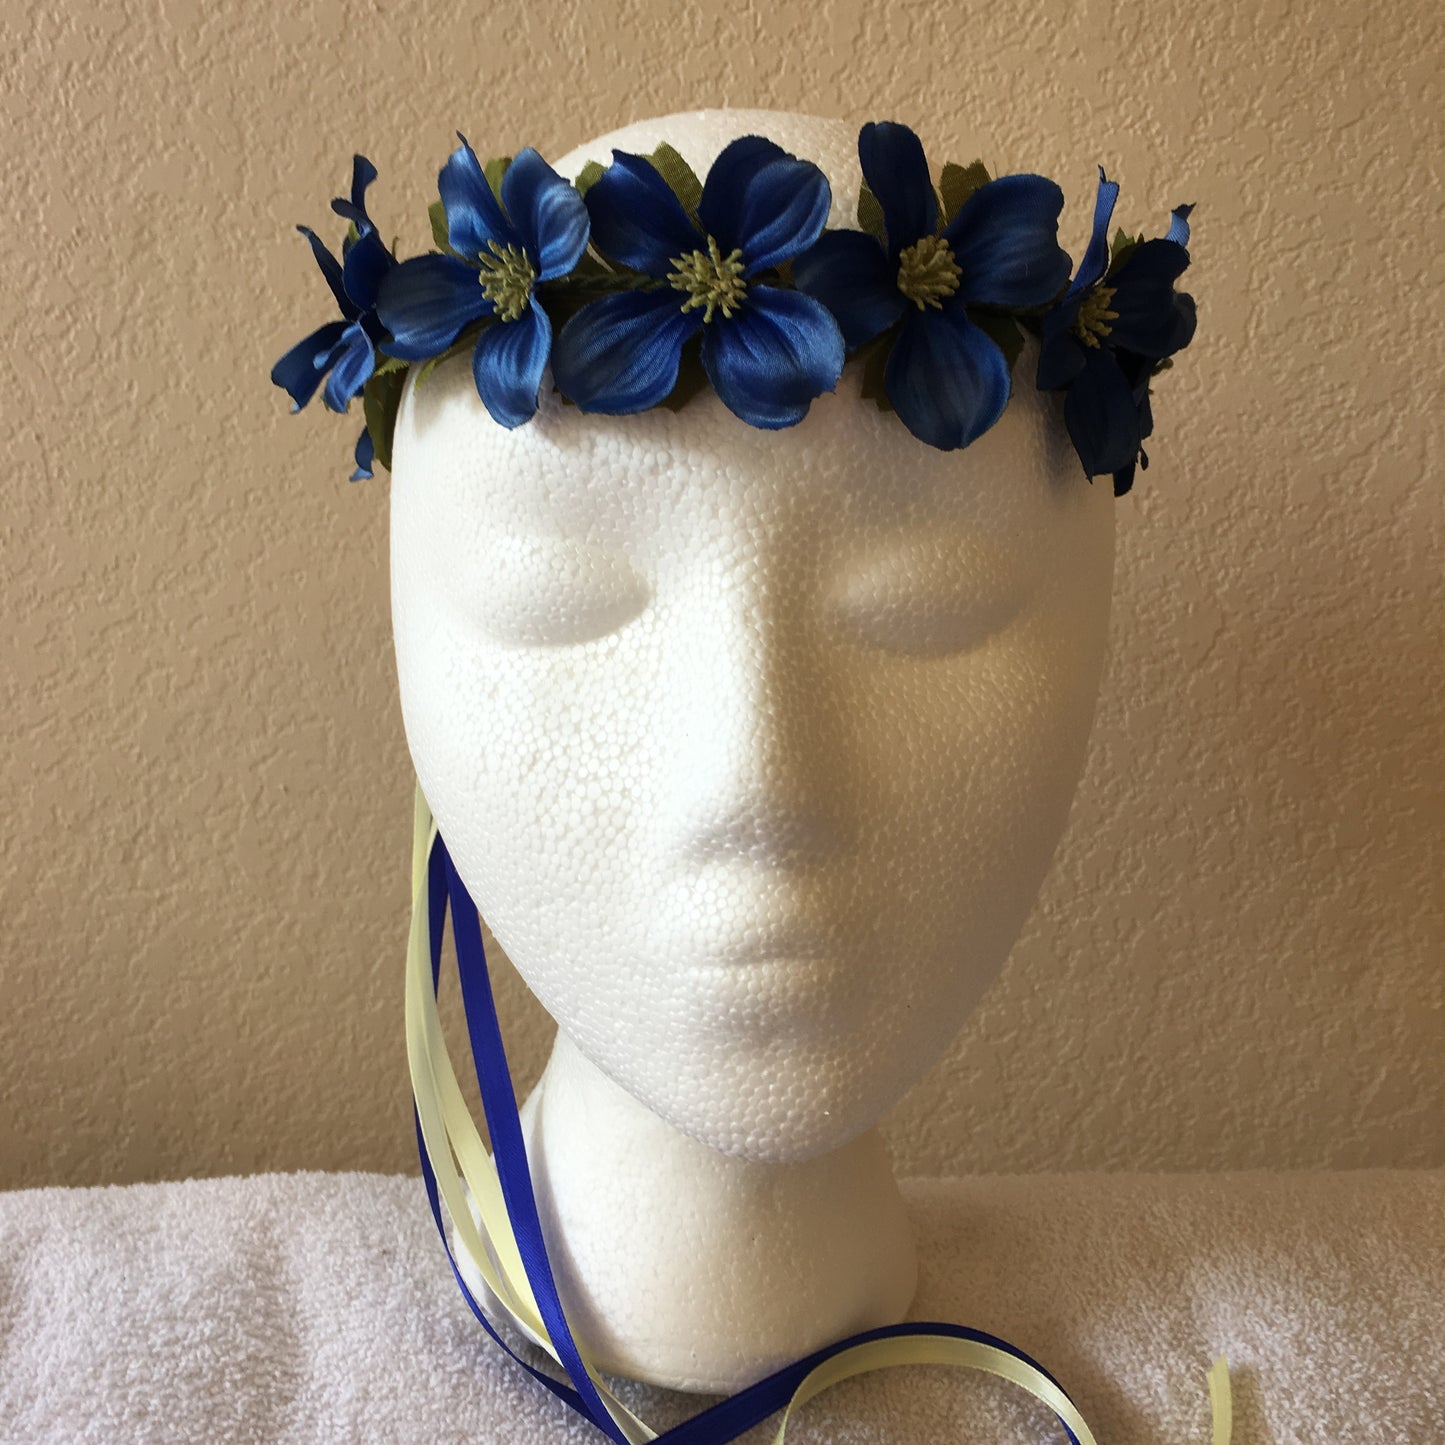 Extra Small Wreath - Blue flowers w/ yellow centers +